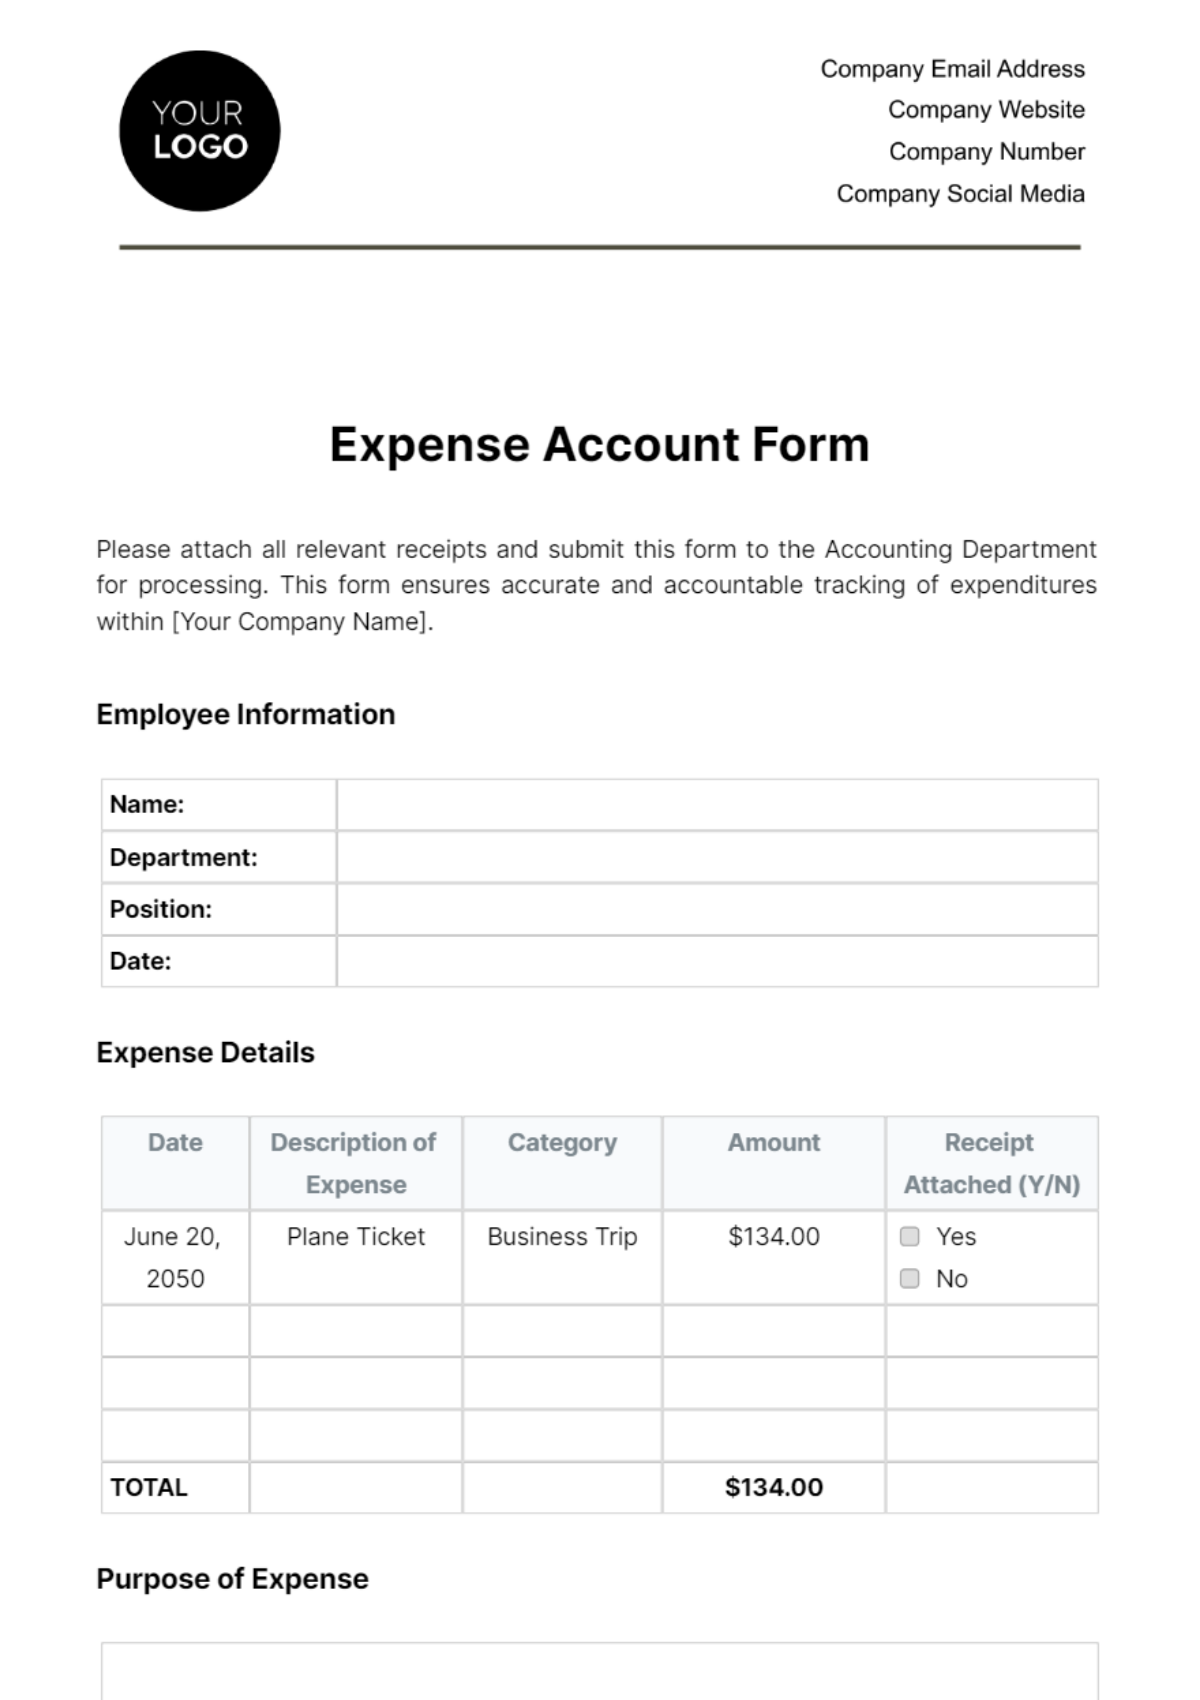 Expense Account Form Template